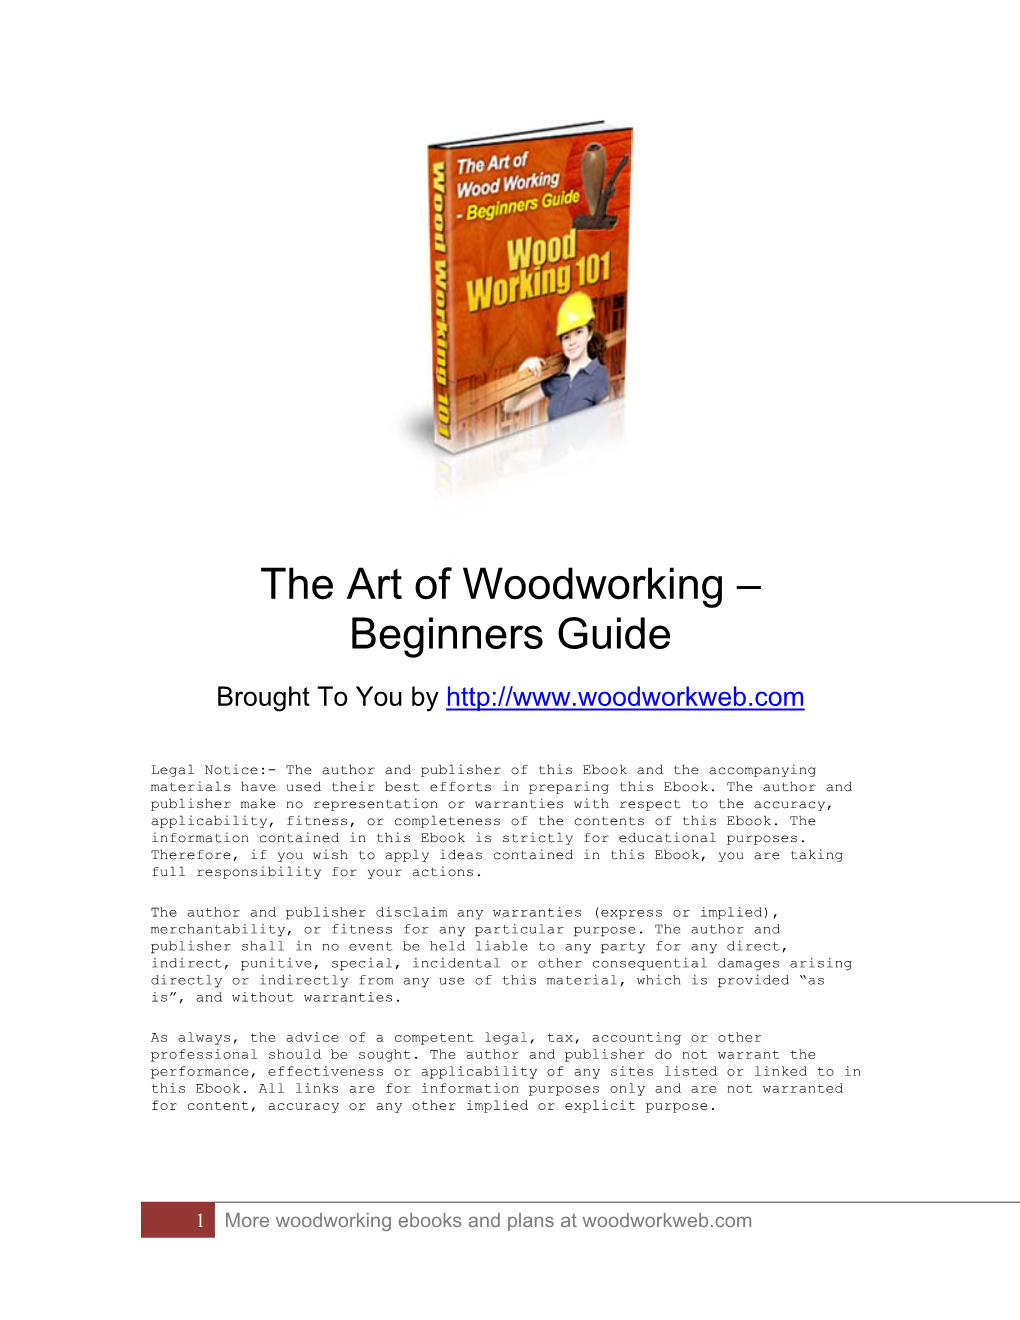 The Art of Woodworking – Beginners Guide